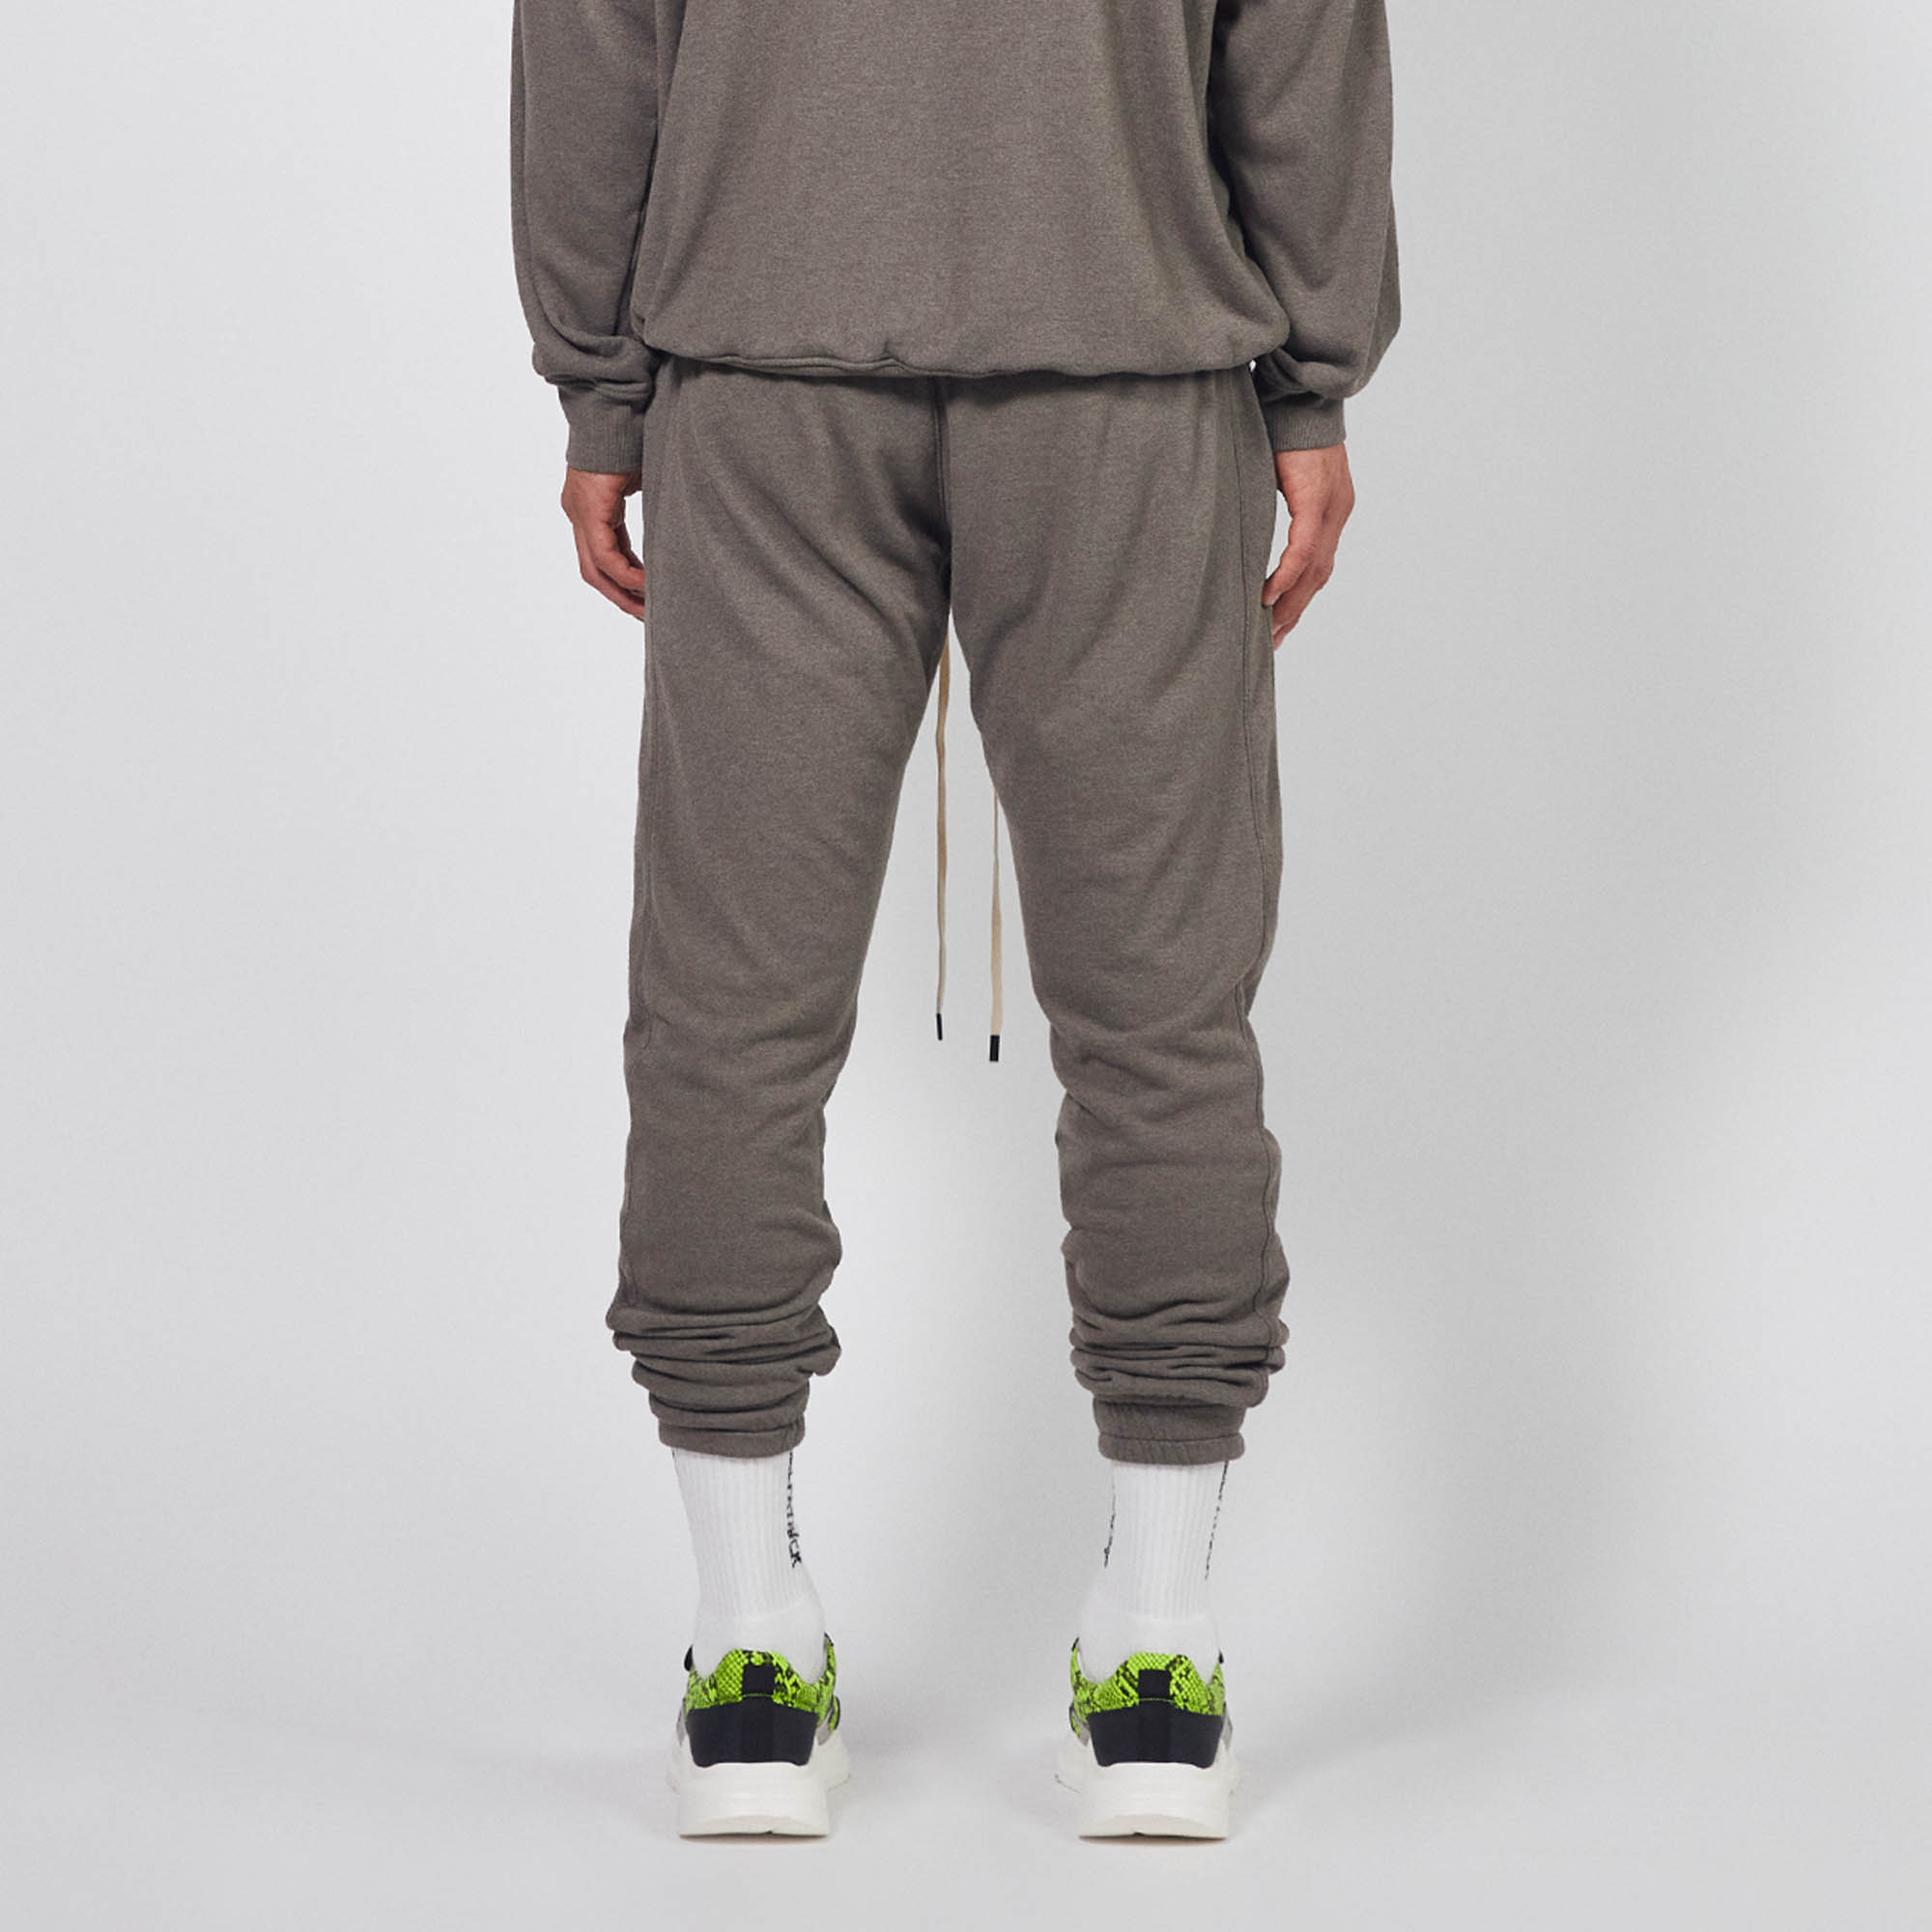 loop terry roaming sweatpants / washed olive heather